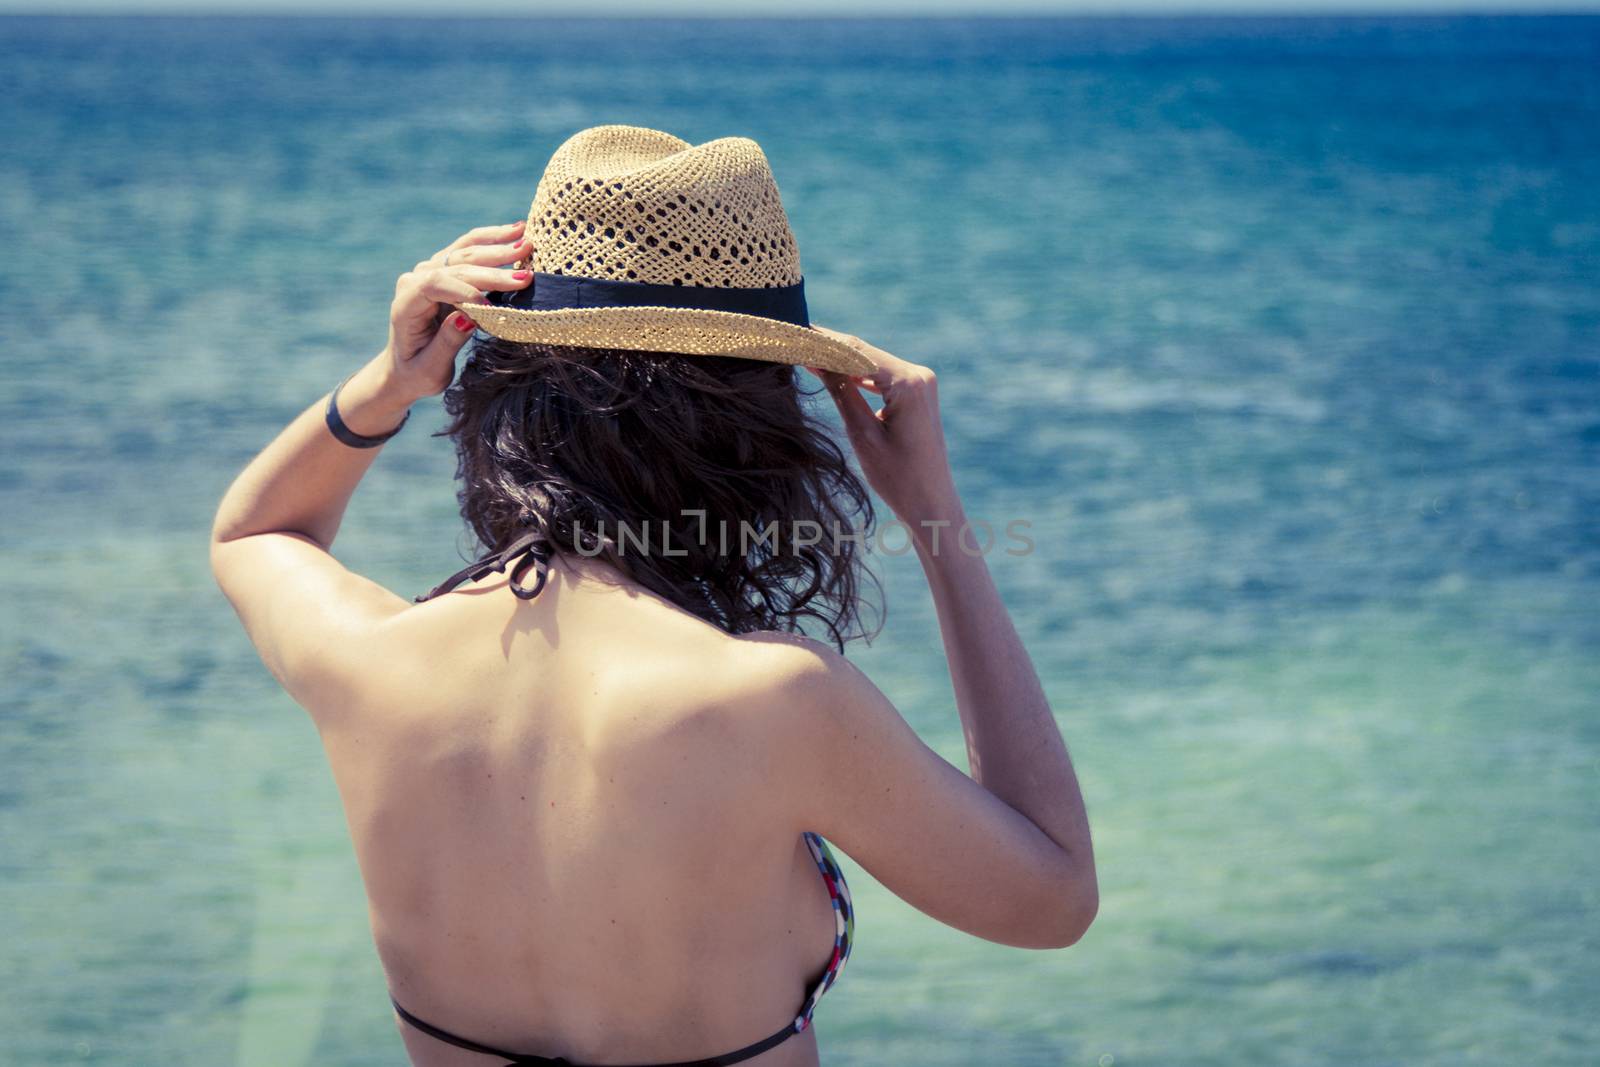 Beach vacation. Beautiful woman in sunhat and bikini looking at the beach on a hot summer day. Photo from Fuerteventura Island, Spain